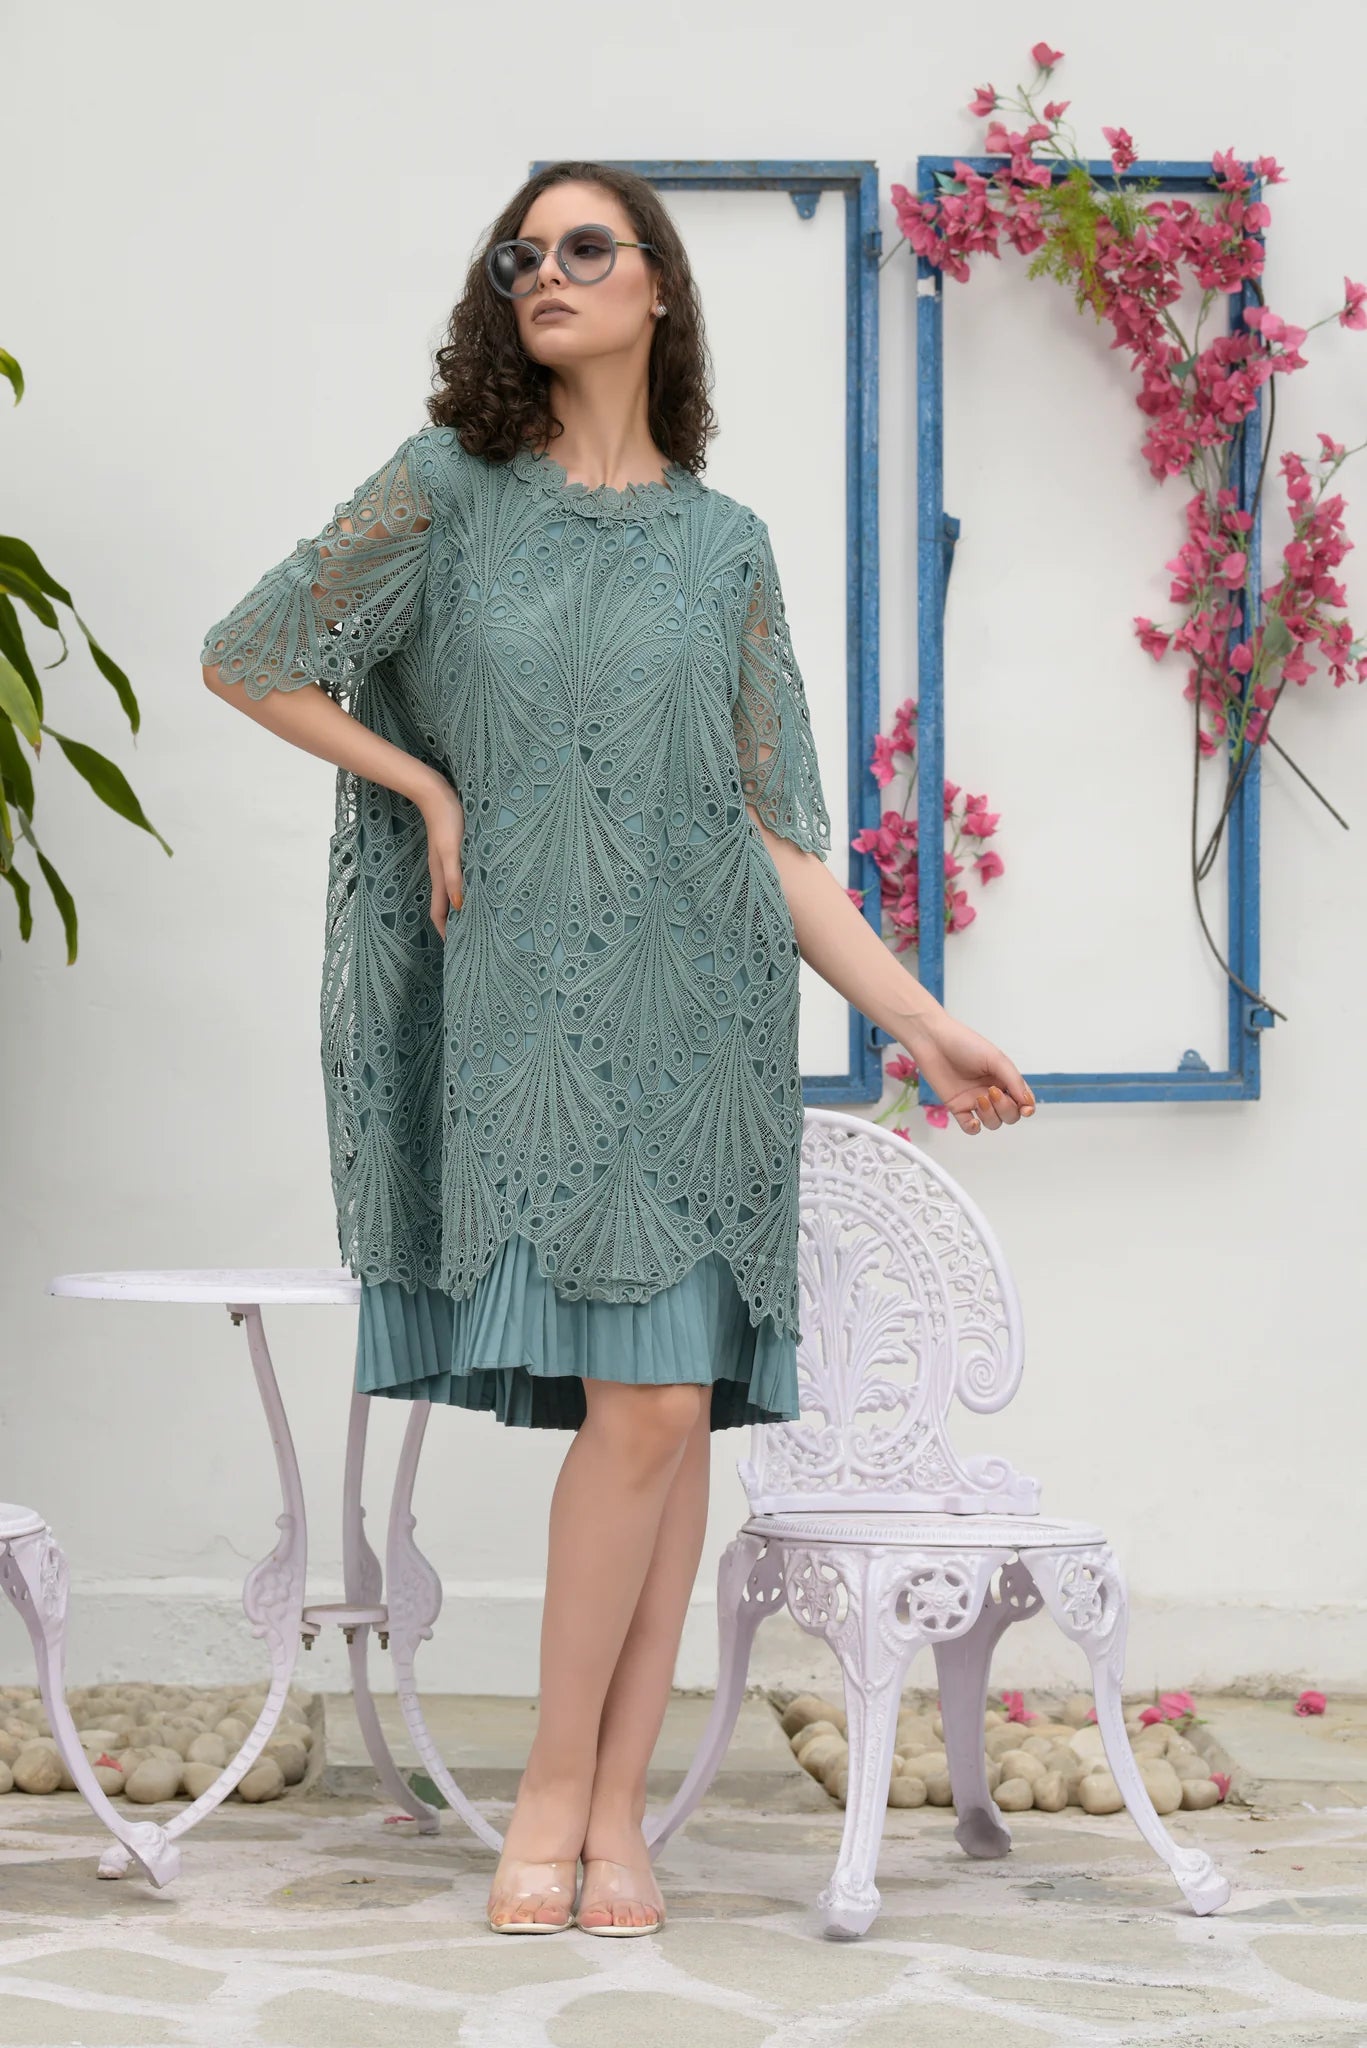 Image of Flaunt your new MYRA MESH DAY LILY LACE DRESS- SOFT GREEN for the perfect daytime look. This fashionable brunch collection dress features delicate mesh lace perfect for a chic and timeless statement. Let this timeless style take you from day to night without missing a beat!  From savoirfashions.com